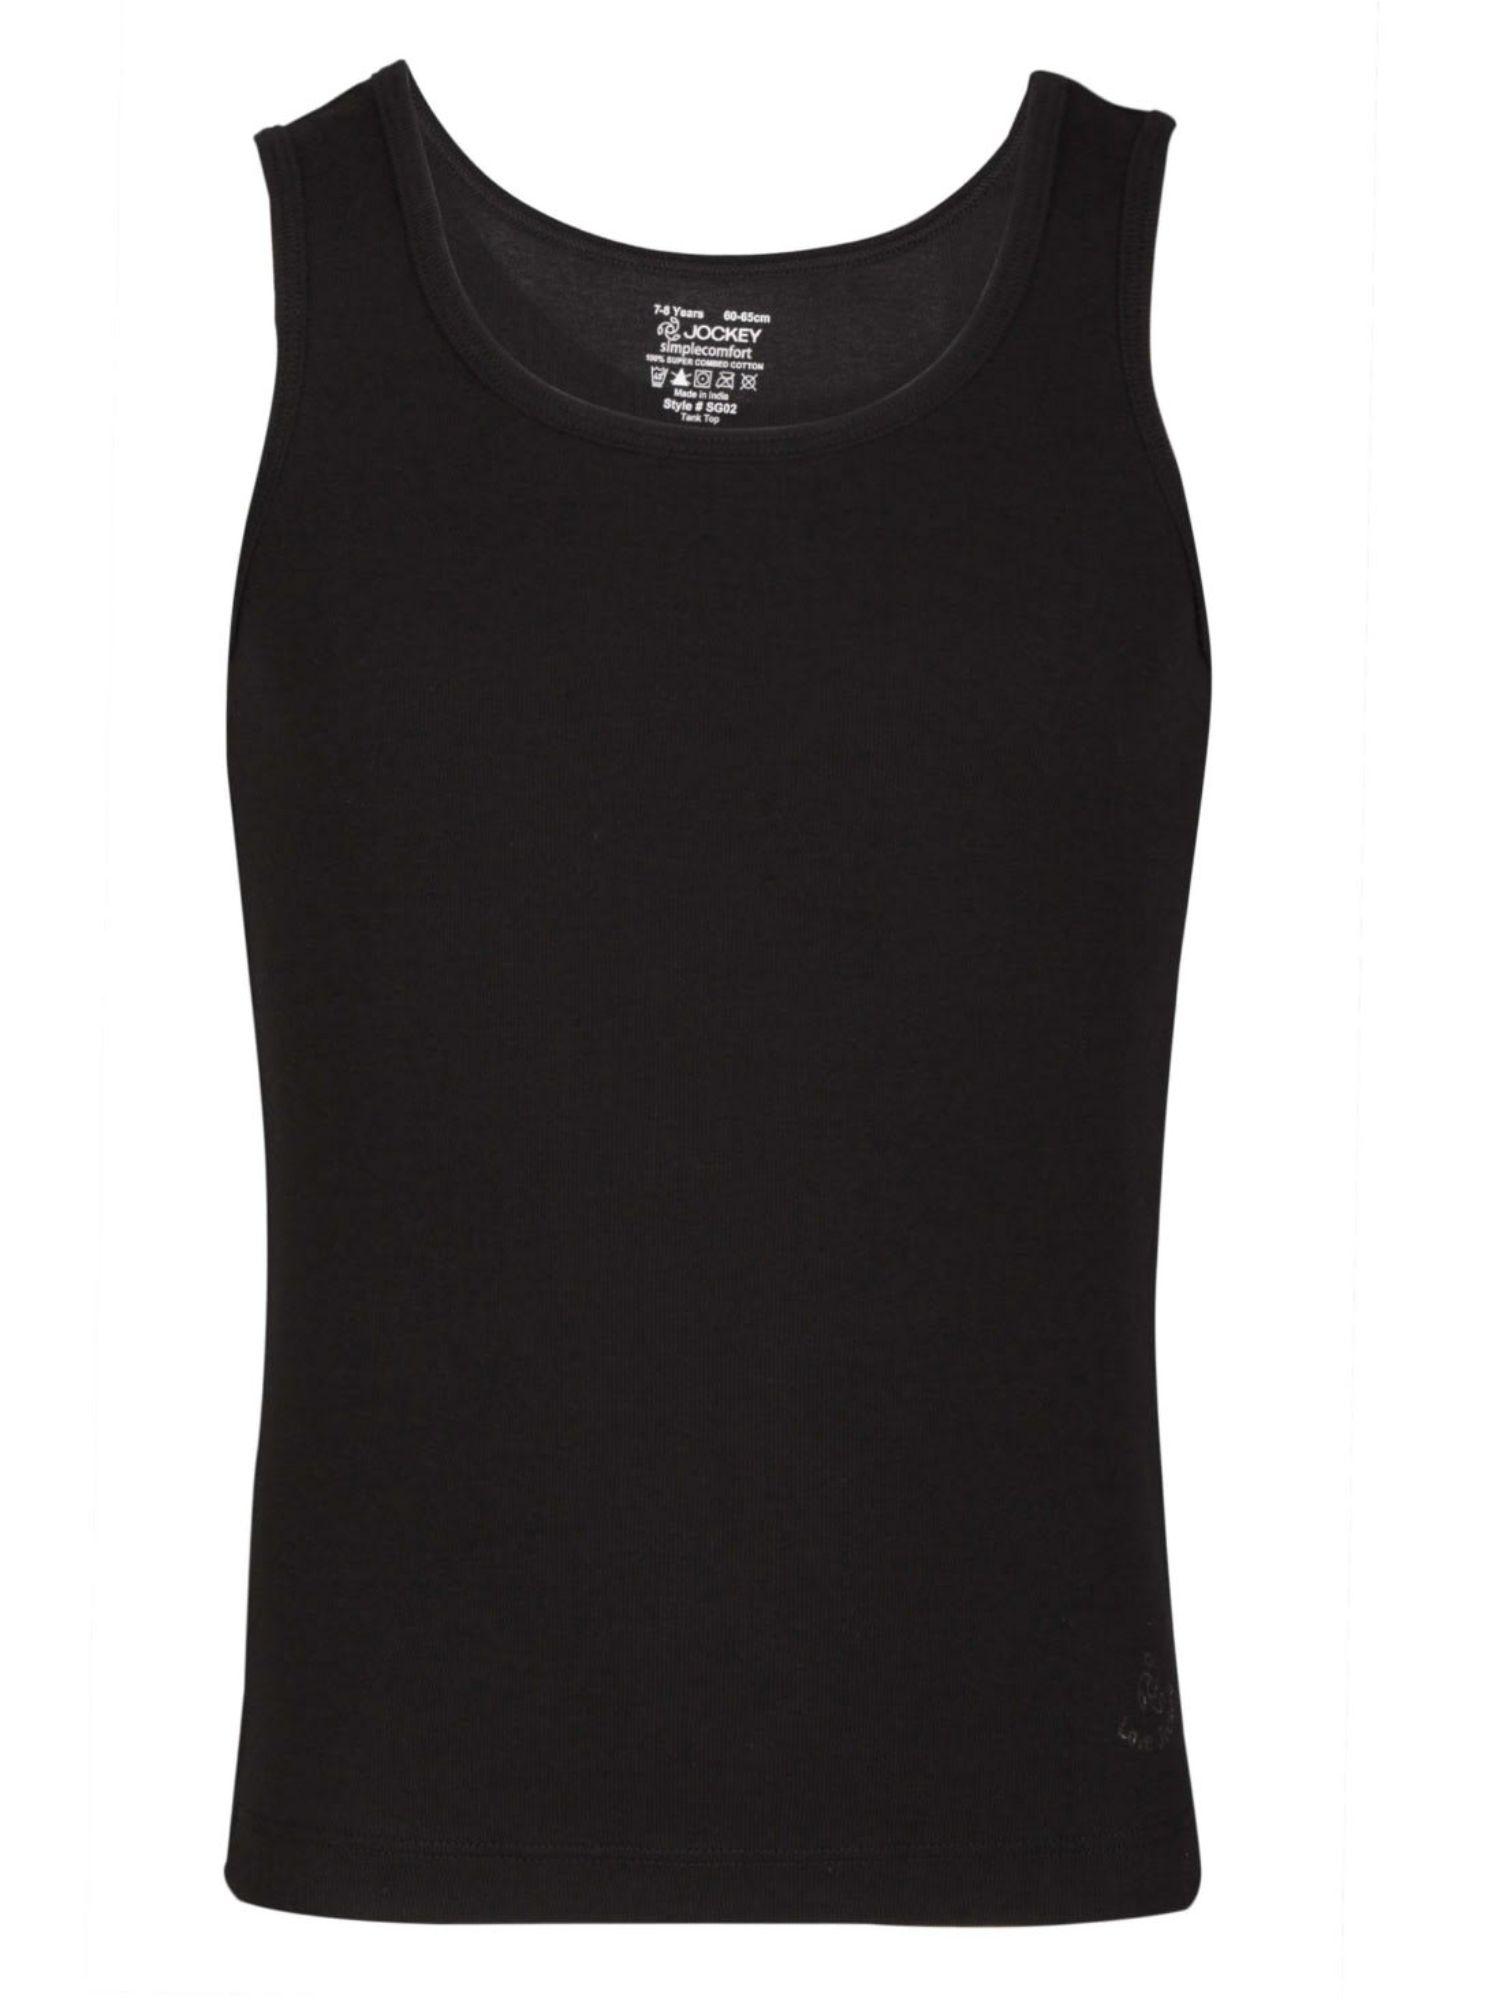 black girls tank top - style number - (sg02)